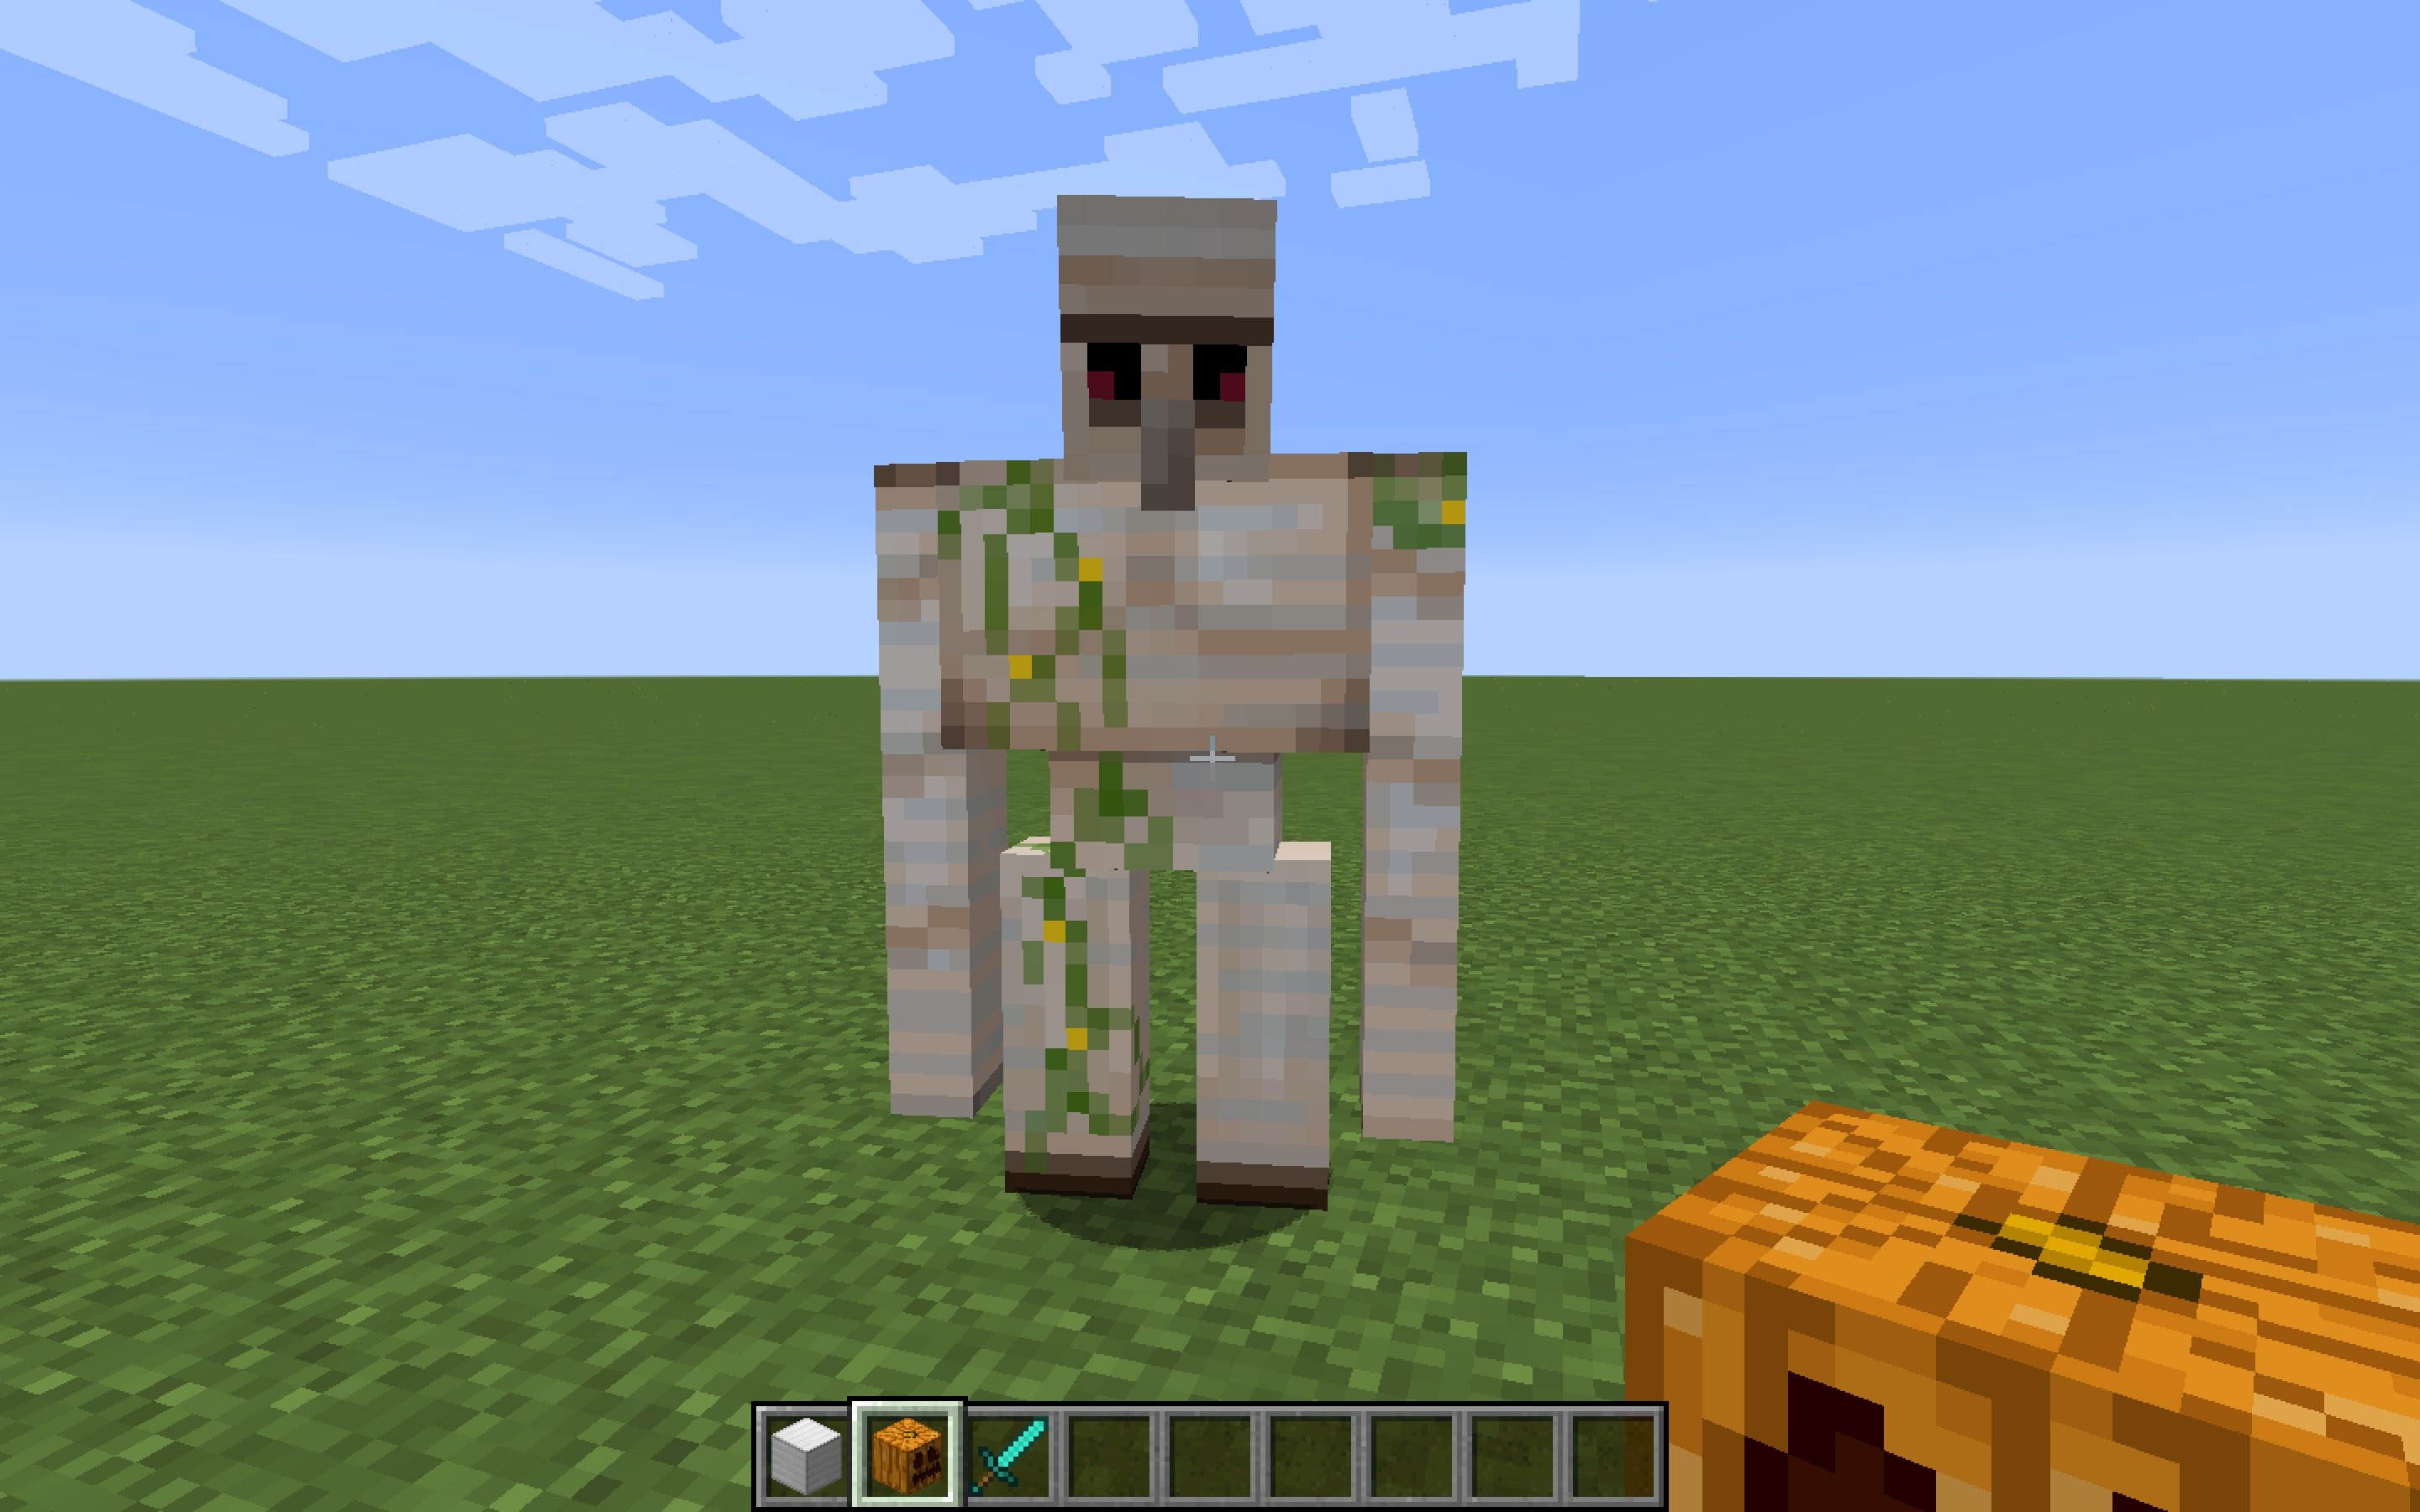 How to make a iron golem in minecraft - B+C Guides